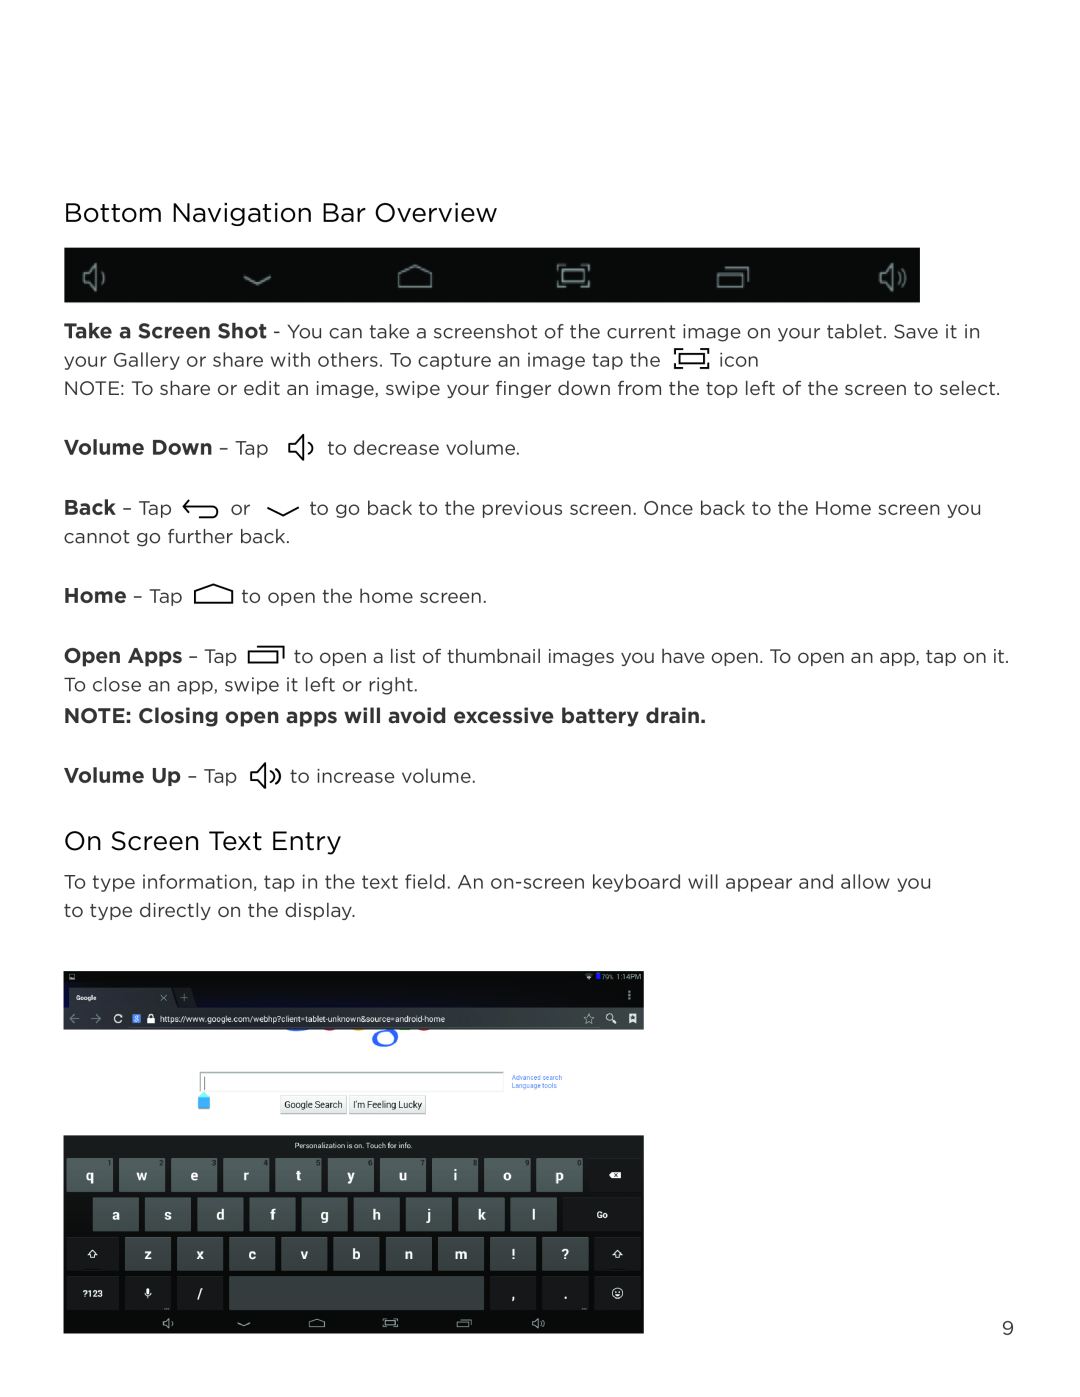 NuVision TM800A520L user manual Bottom Navigation Bar Overview, On Screen Text Entry, Volume Down - Tap 